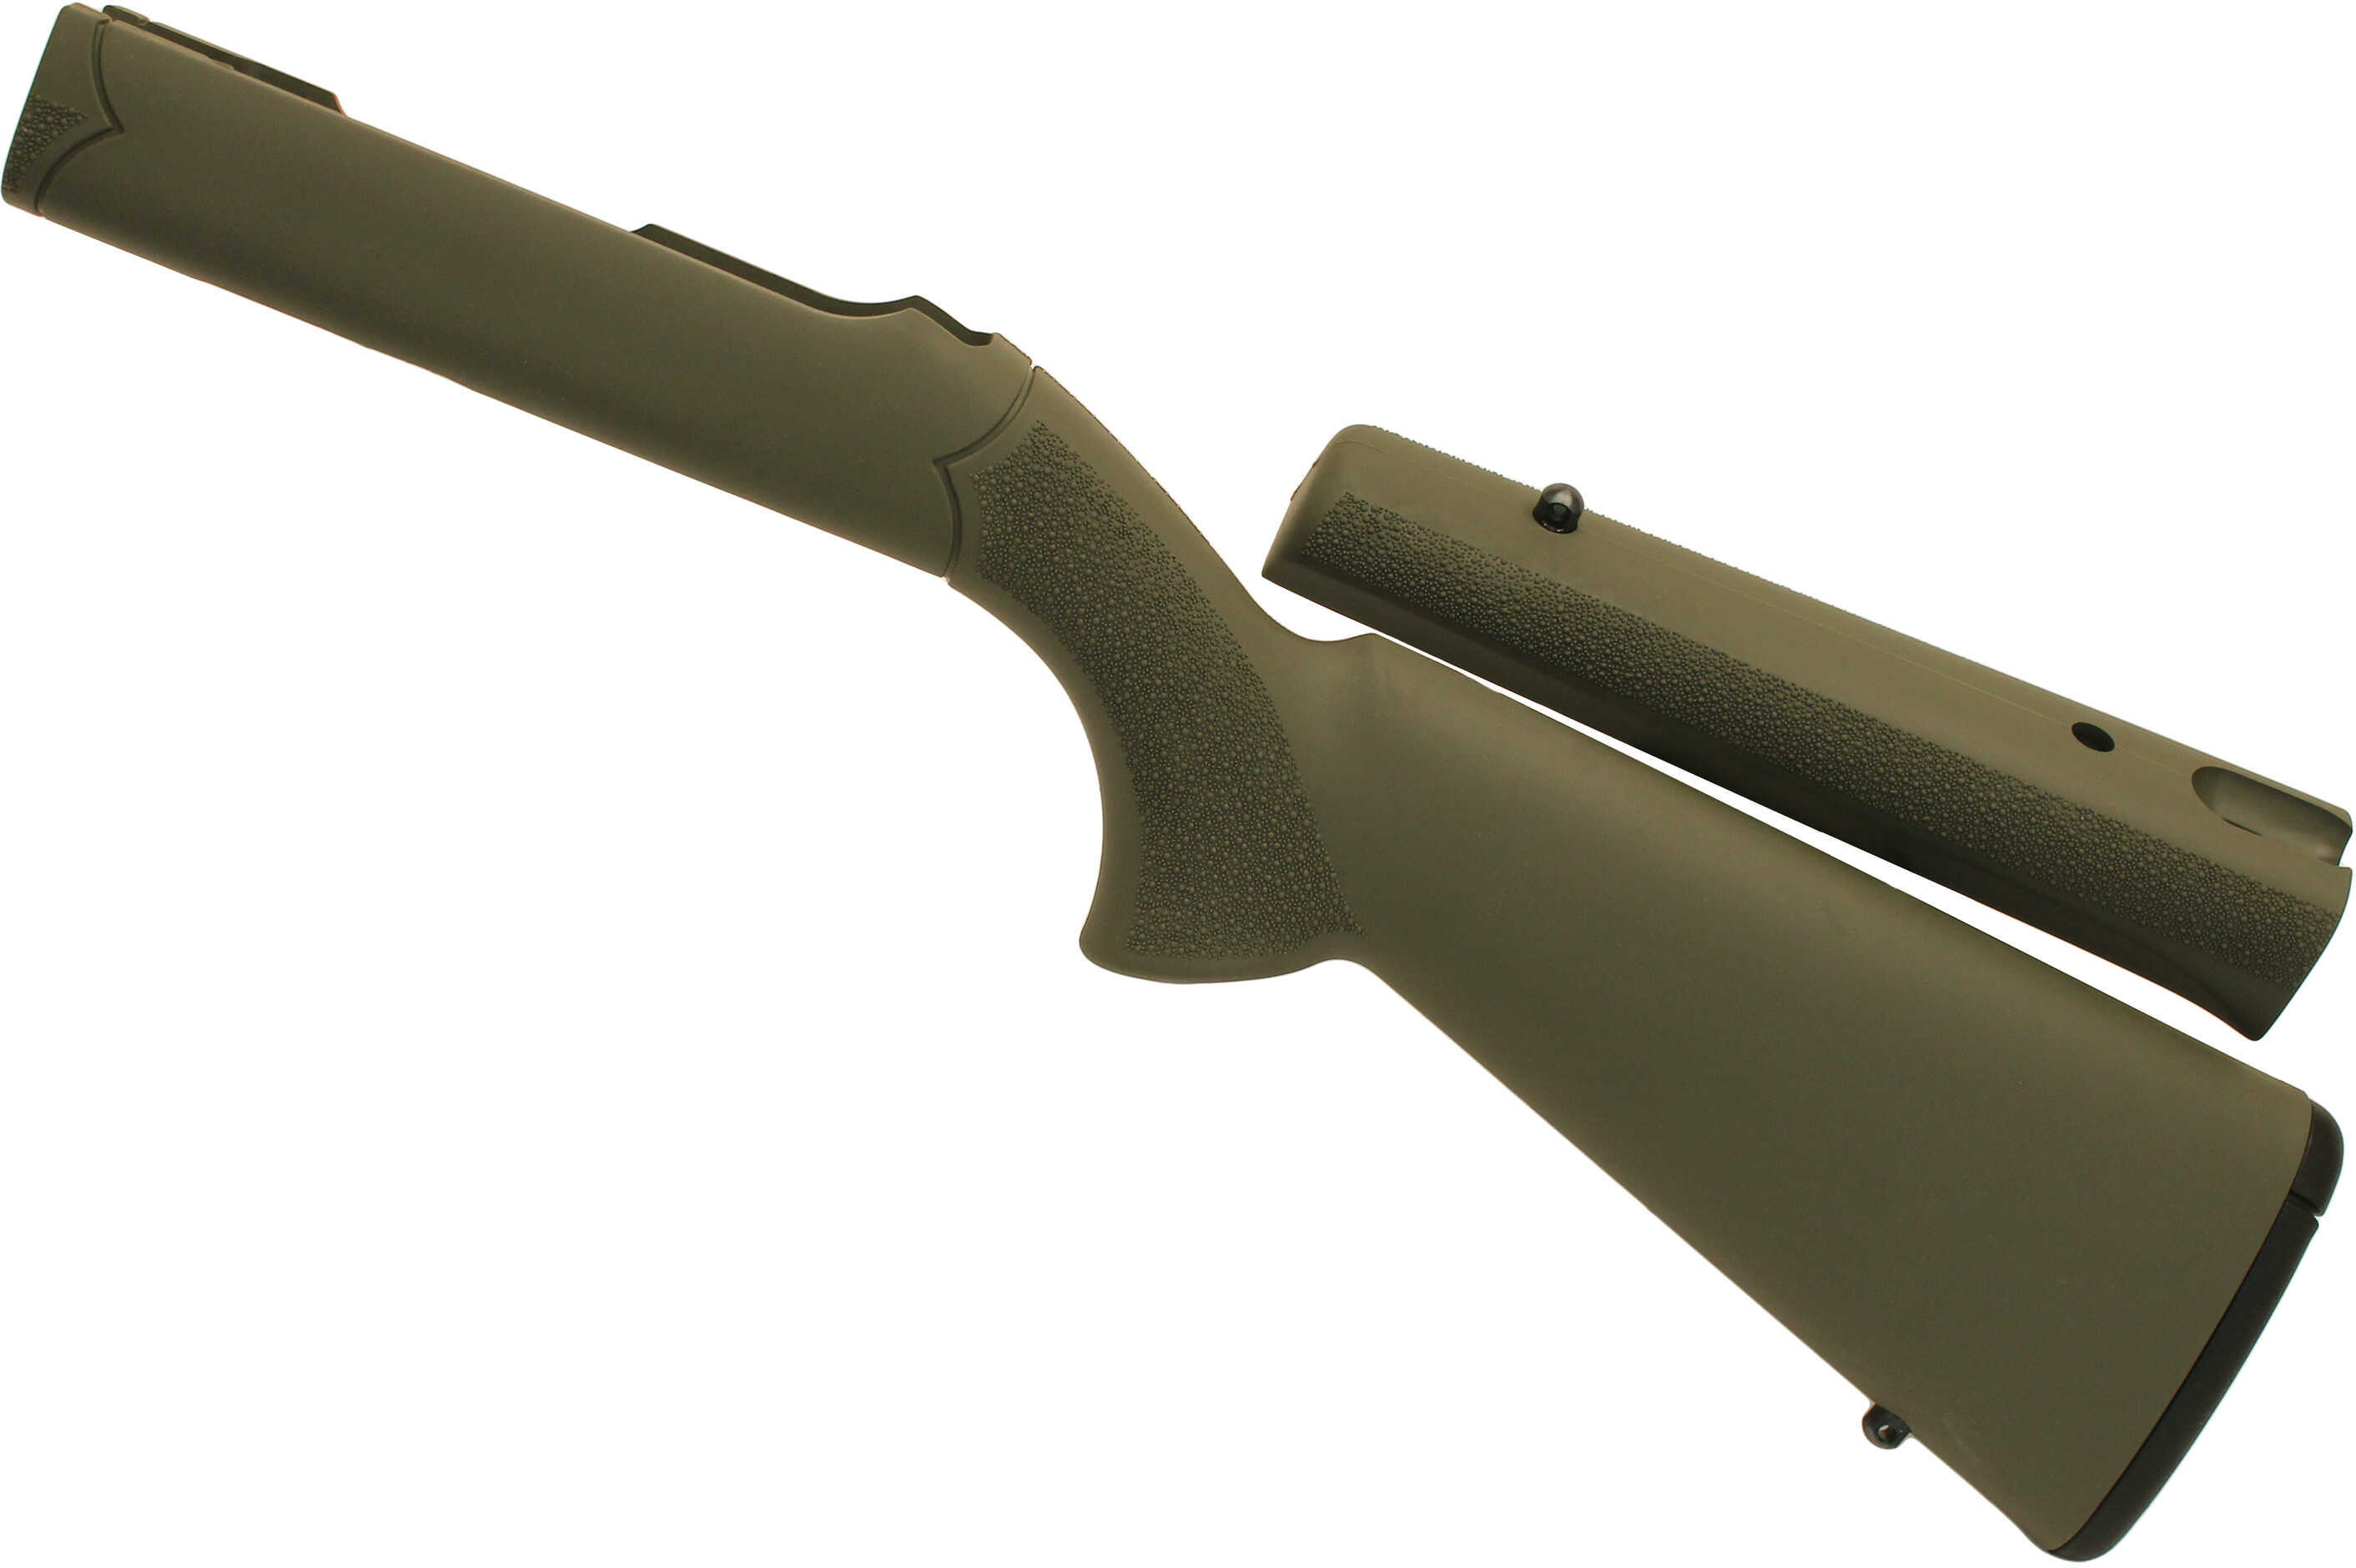 Hogue 10/22 Takedown Standard Barrel Rubber Over Molded Stock Olive Drab Green Md: 21240